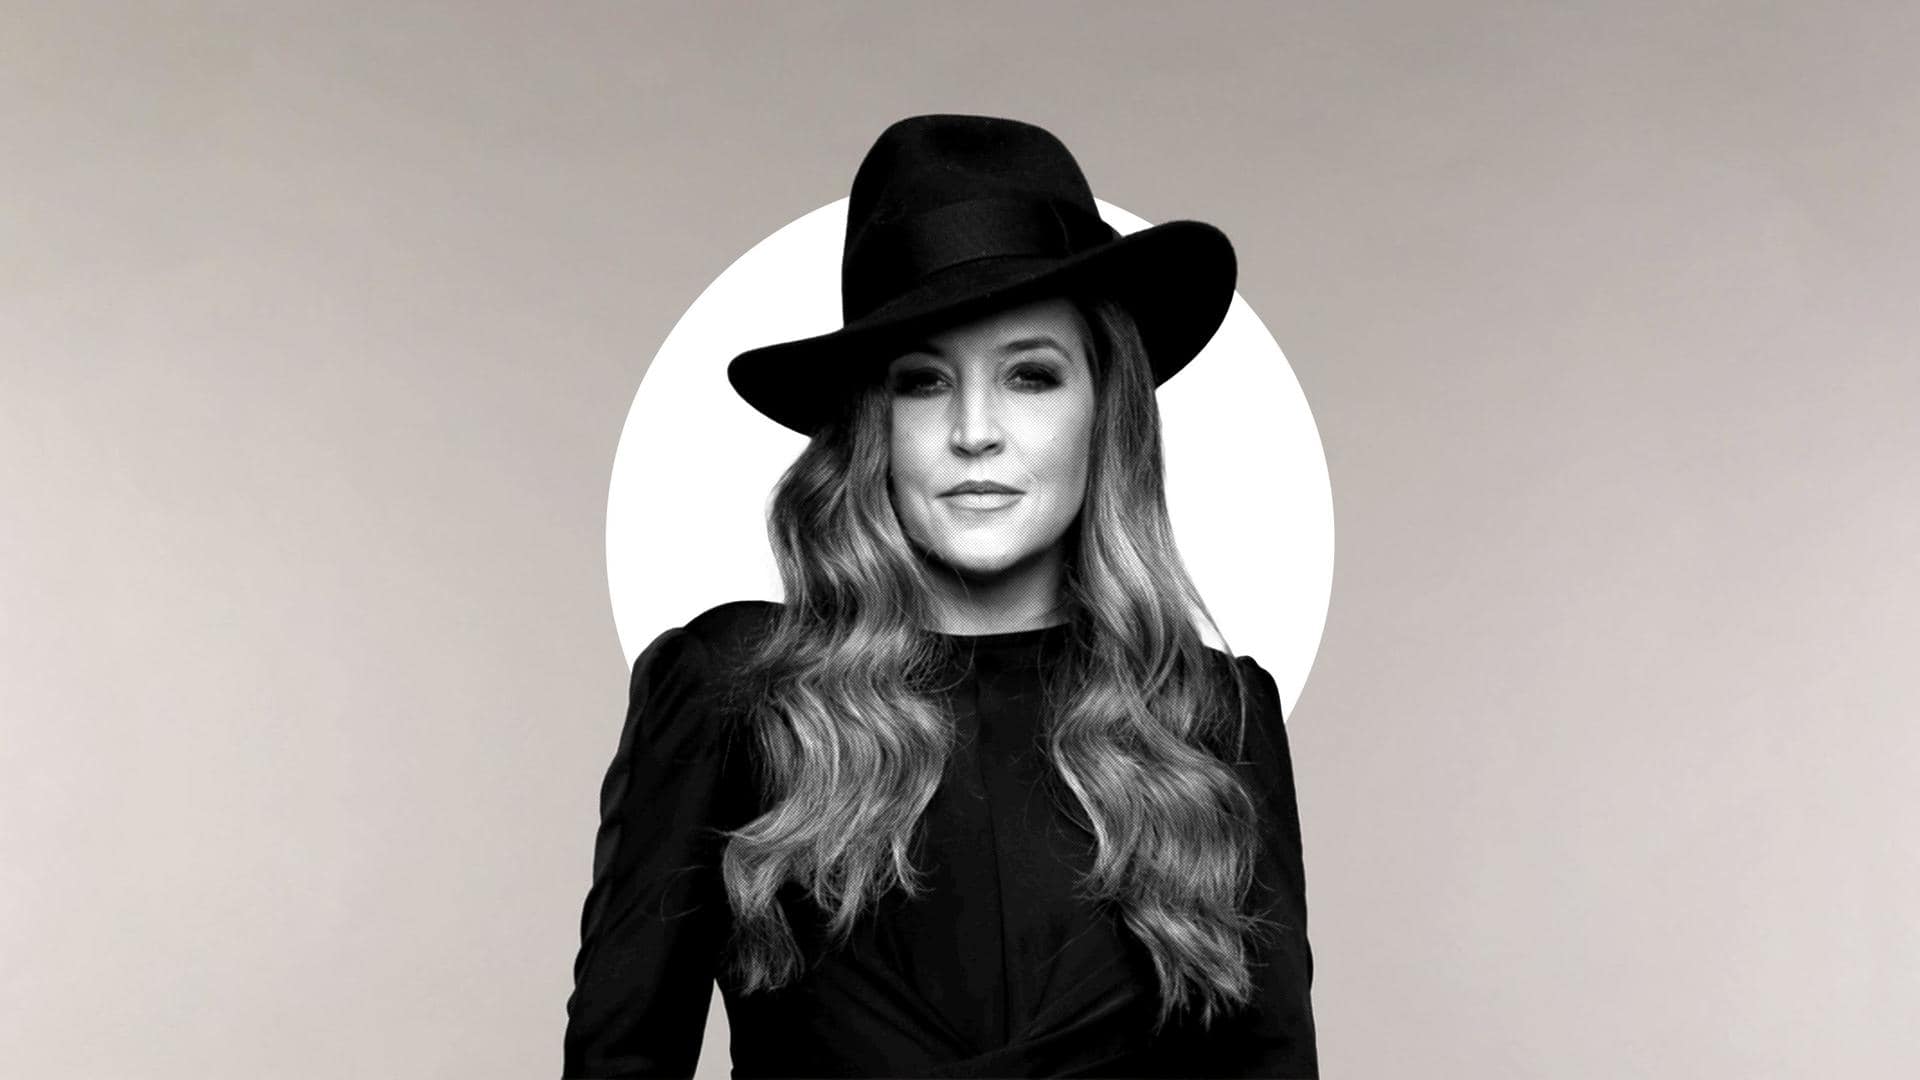 Hollywood: Lisa Marie Presley's cause of death revealed